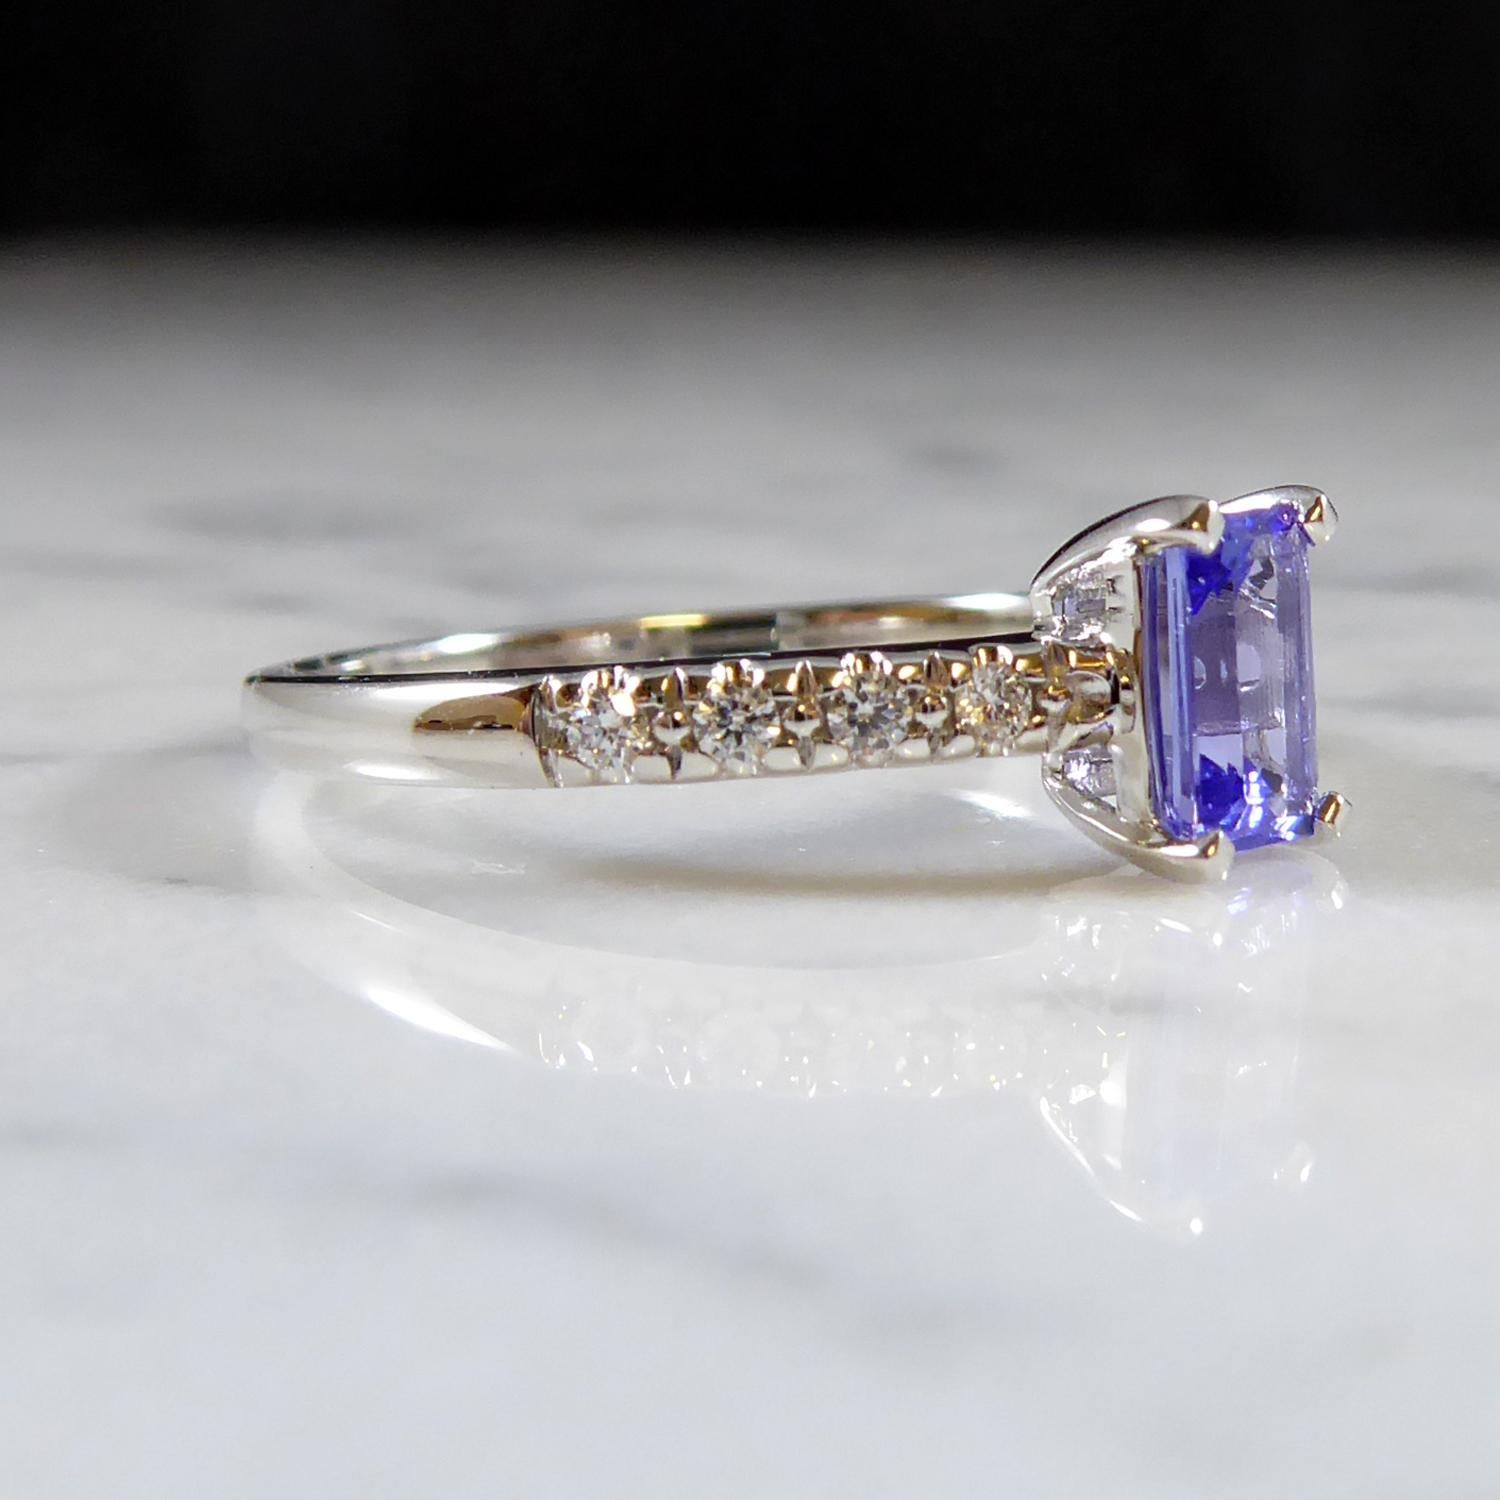 A beautiful tanzanite and diamond ring perfect for an engagement ring or dress ring for the petite hand.  The rectangular shaped tanzanite measuring 6.0mm x 4.0mm is set in four white claws to an open rectanglar mount to diamond set shoulders.  Each